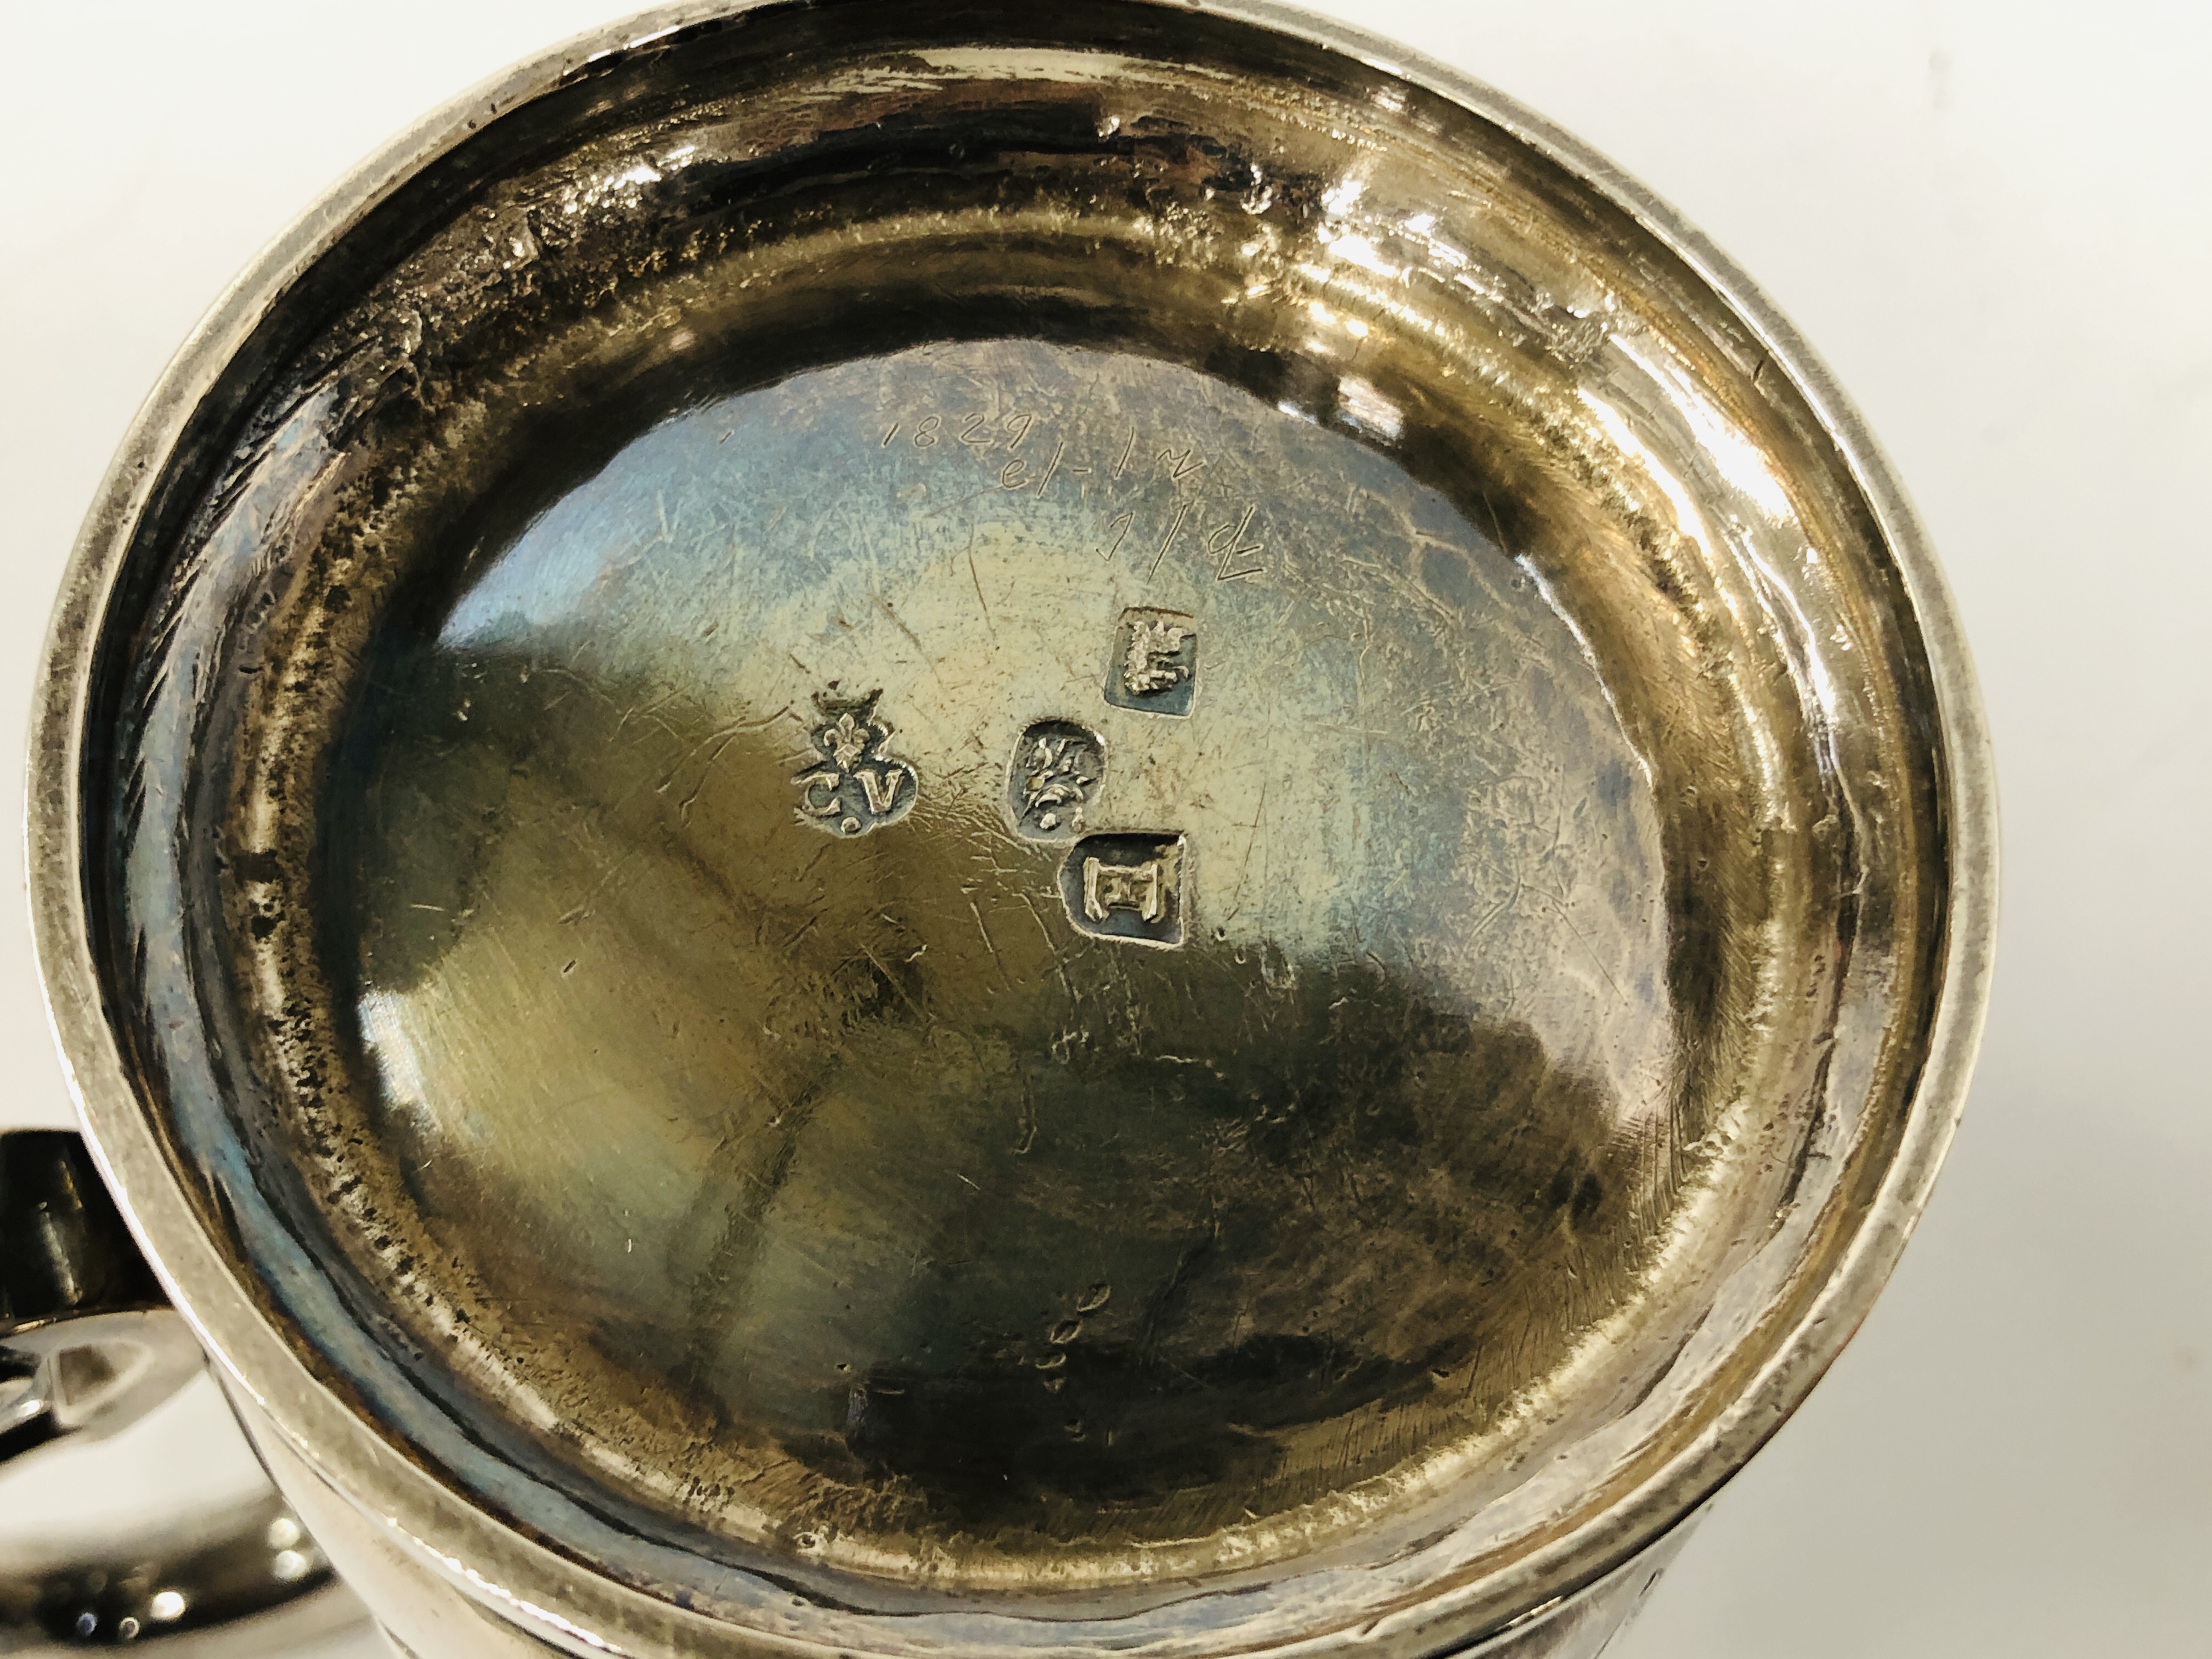 A GEORGE I BRITANNIA STANDARD SILVER LIPPED TANKARD WITH LATER DECORATION AND INSCRIPTION HEIGHT - Image 7 of 8